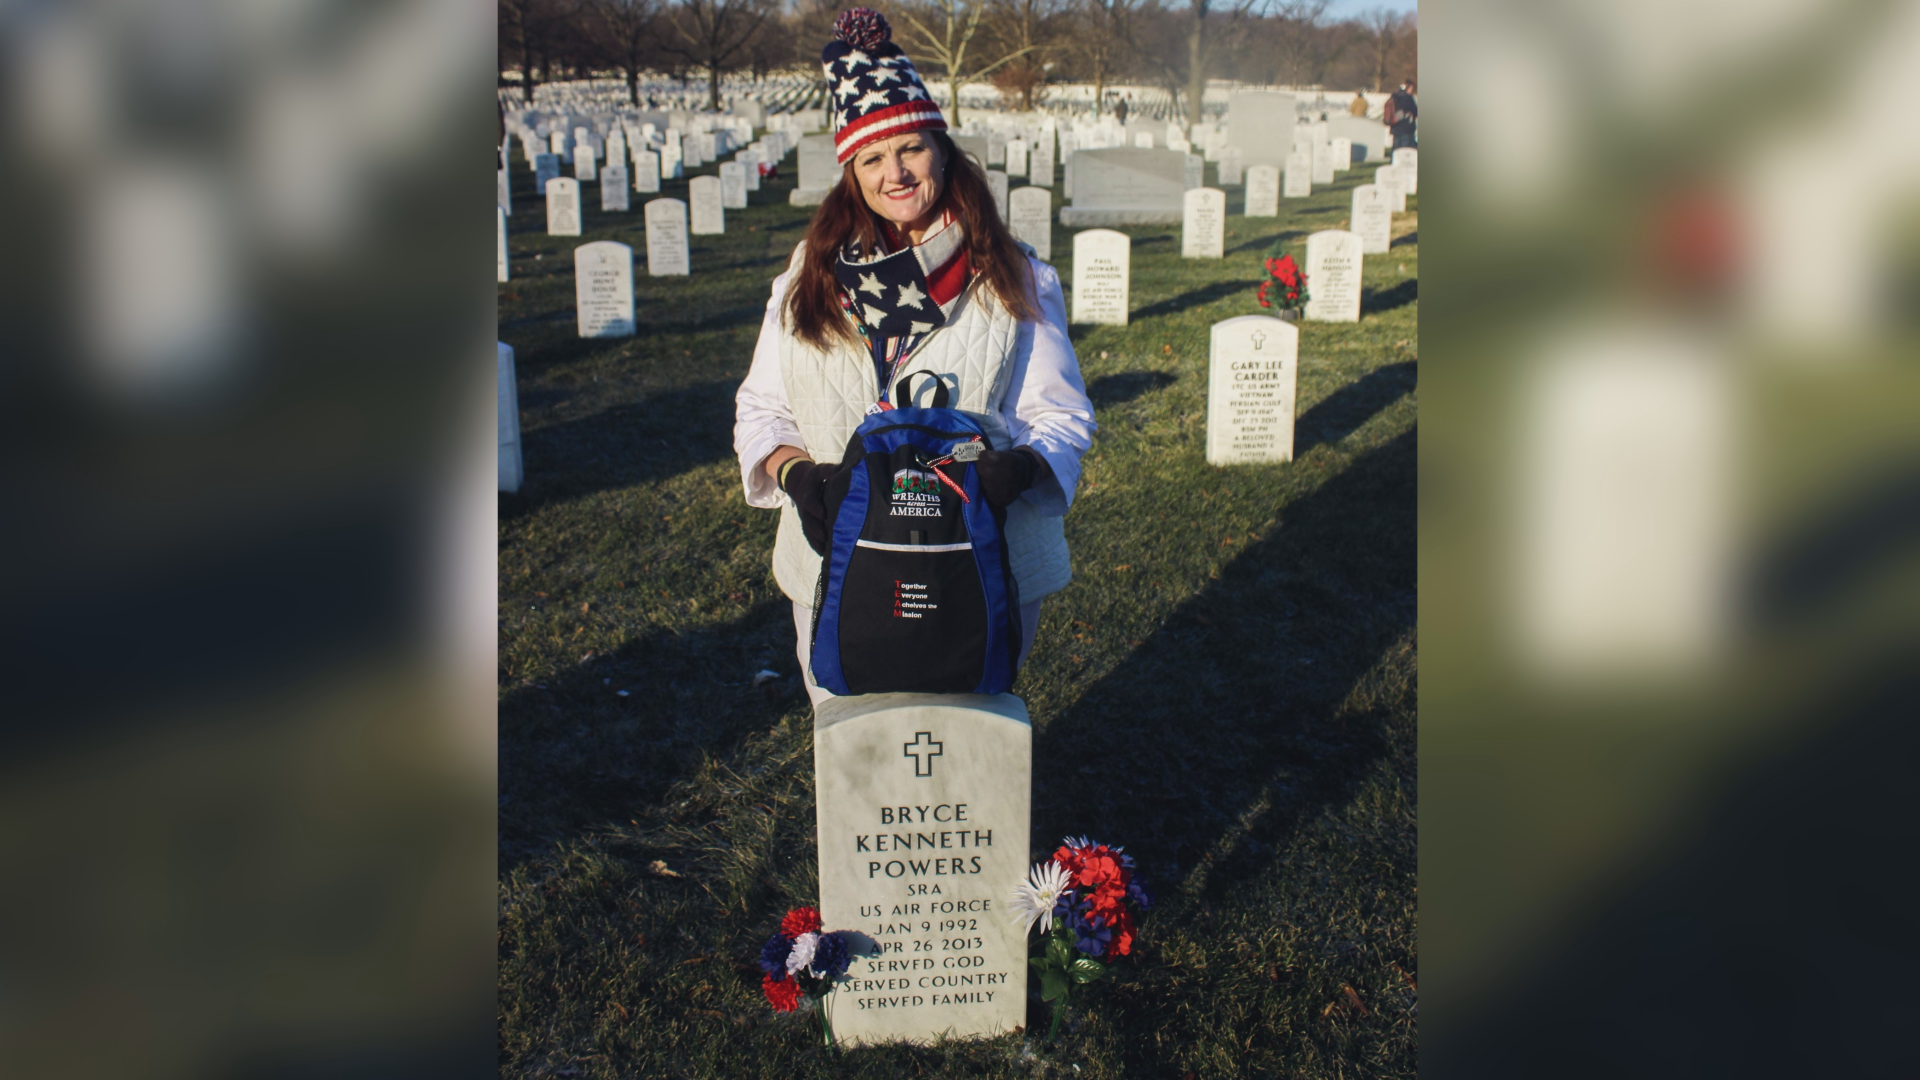 A North Carolina woman running 1,000 miles across all 50 states to raise money for 7,777 wreaths to be laid at Arlington National Cemetery led a fun run in Killeen Sunday.